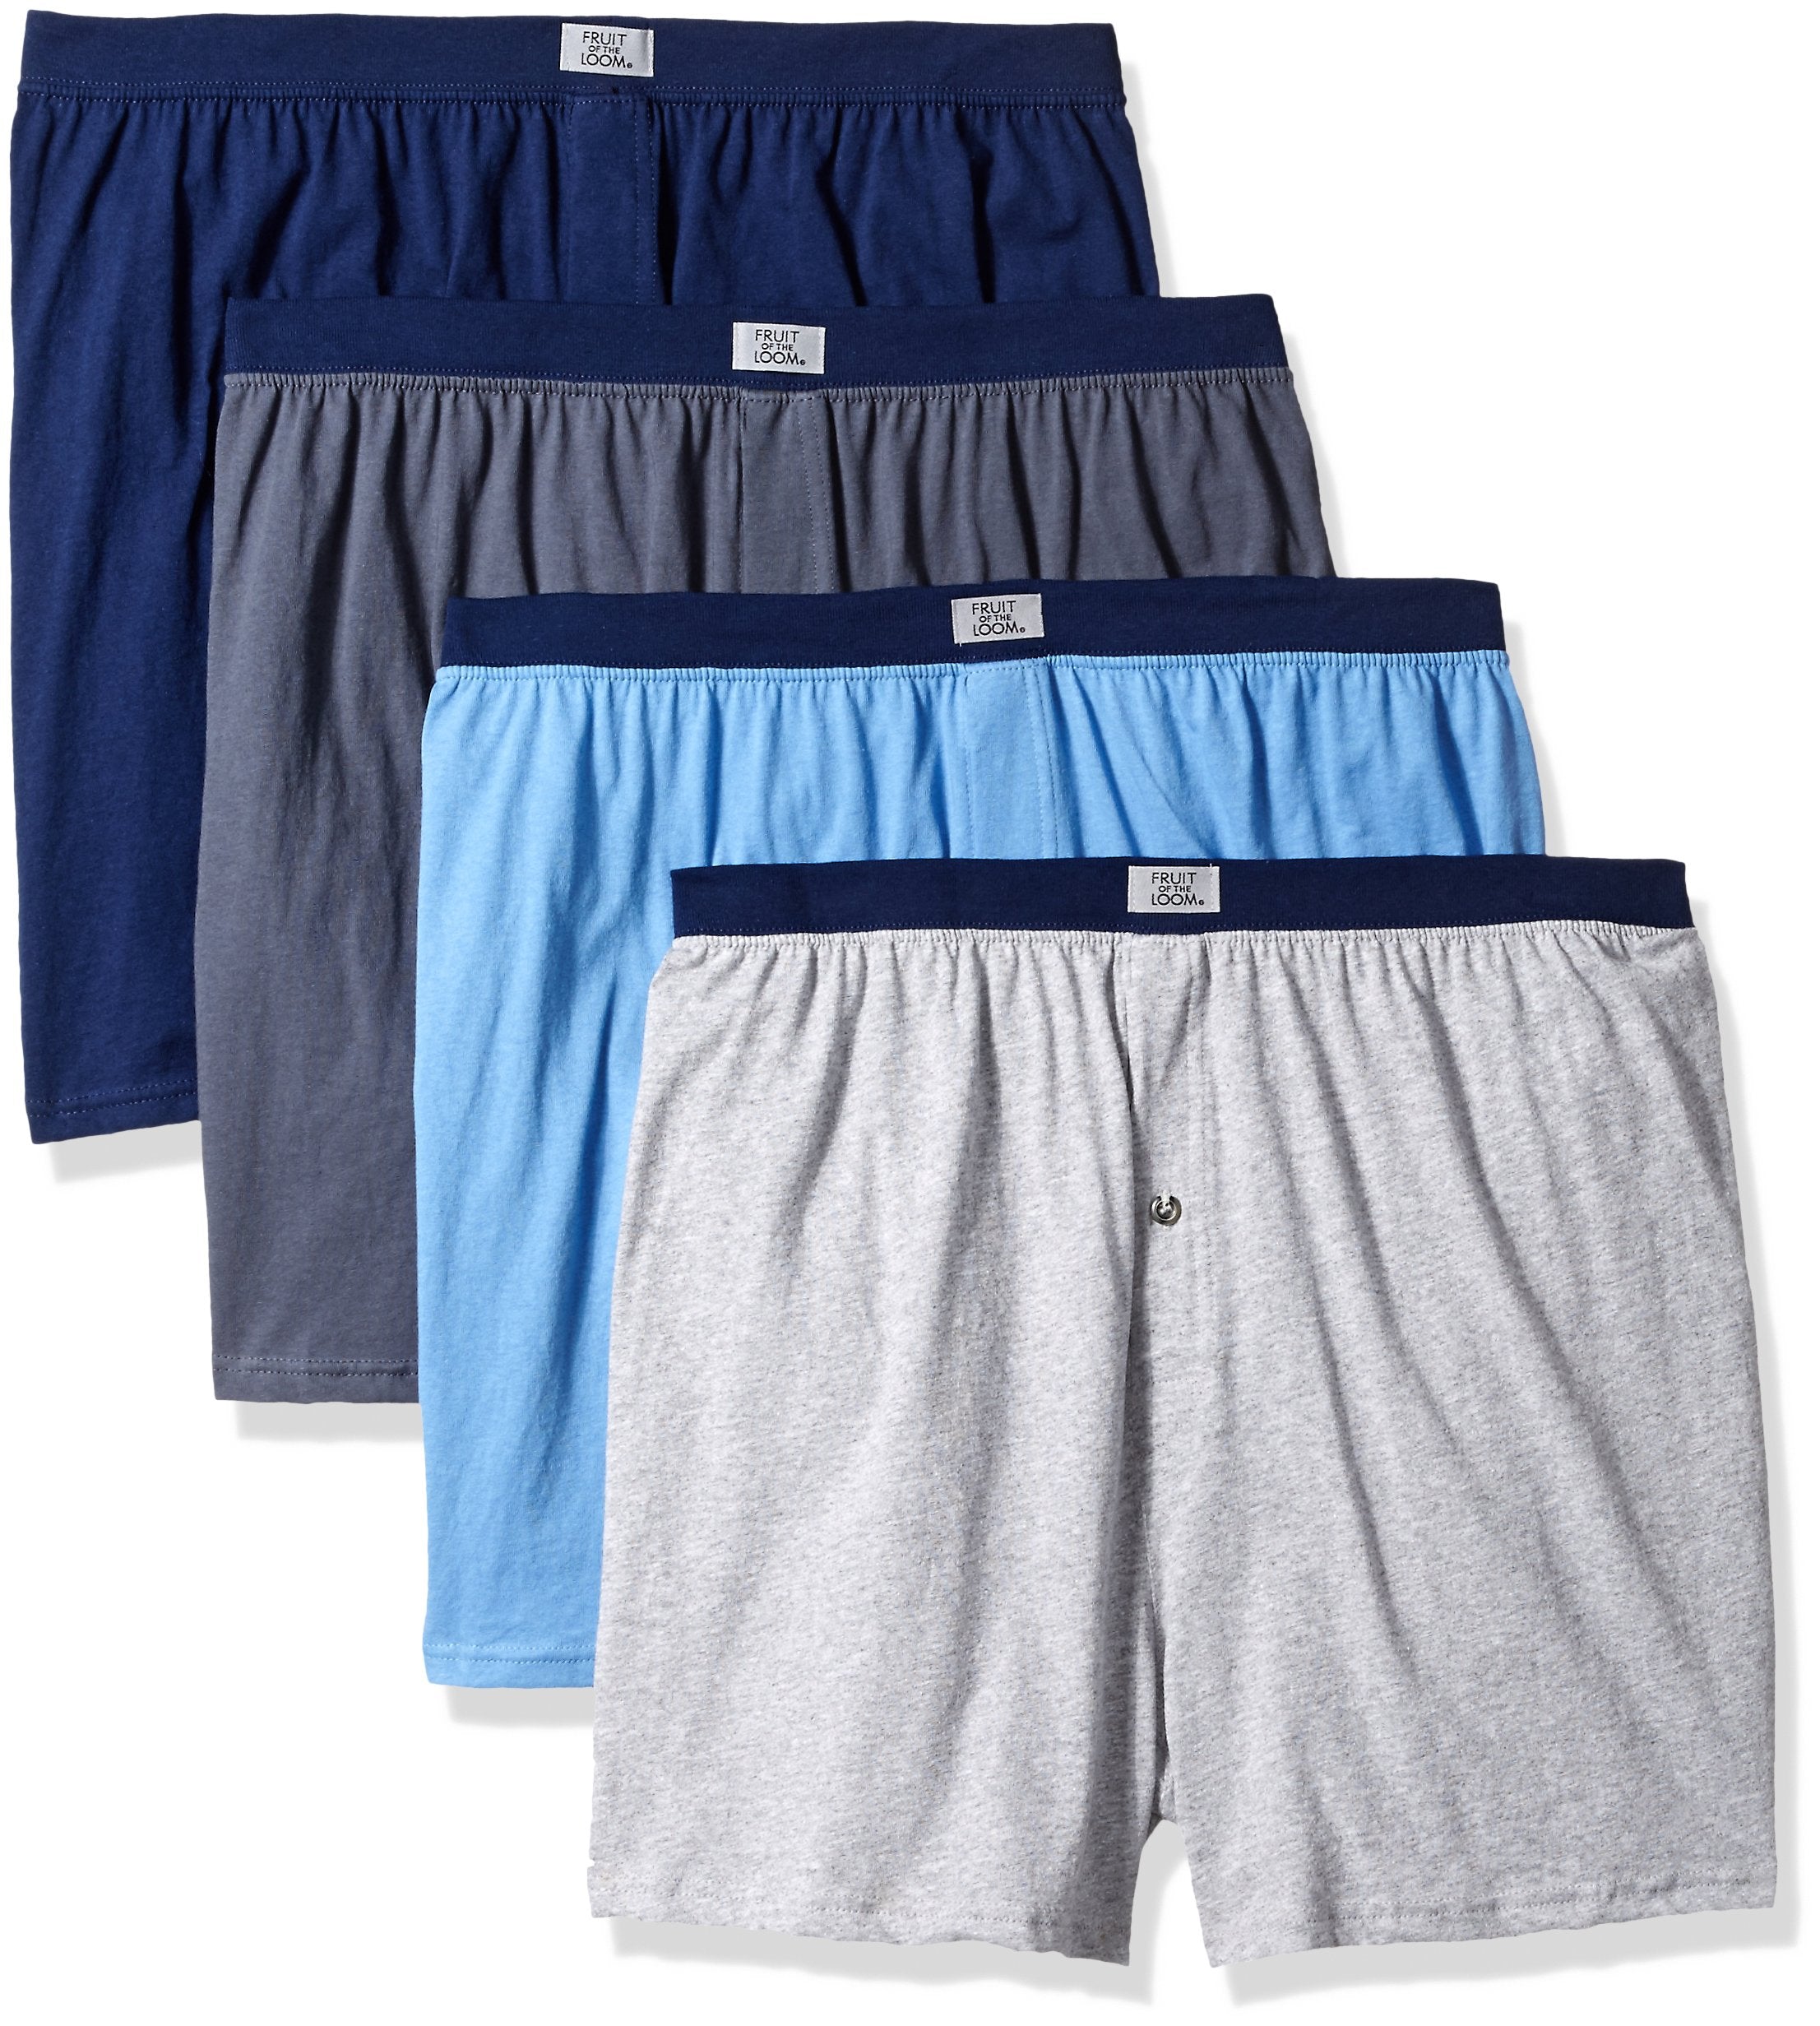 FTL-4P540X - Fruit of the Loom Mens Soft Stretch-Knit Boxers 4-Pack ...